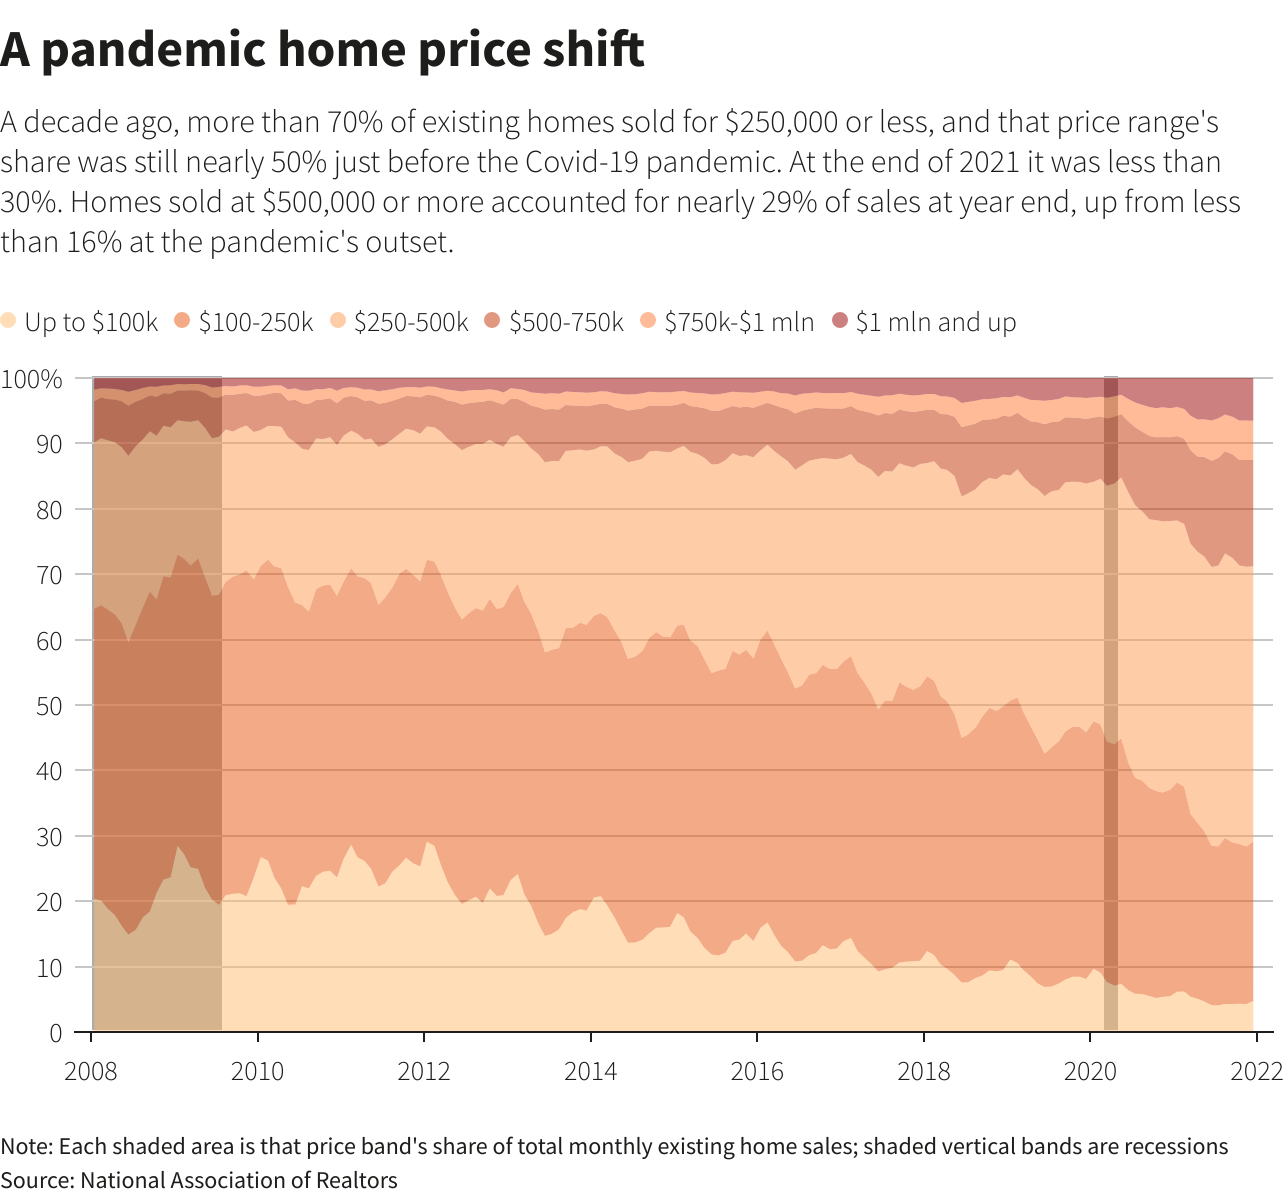 A pandemic home price shift